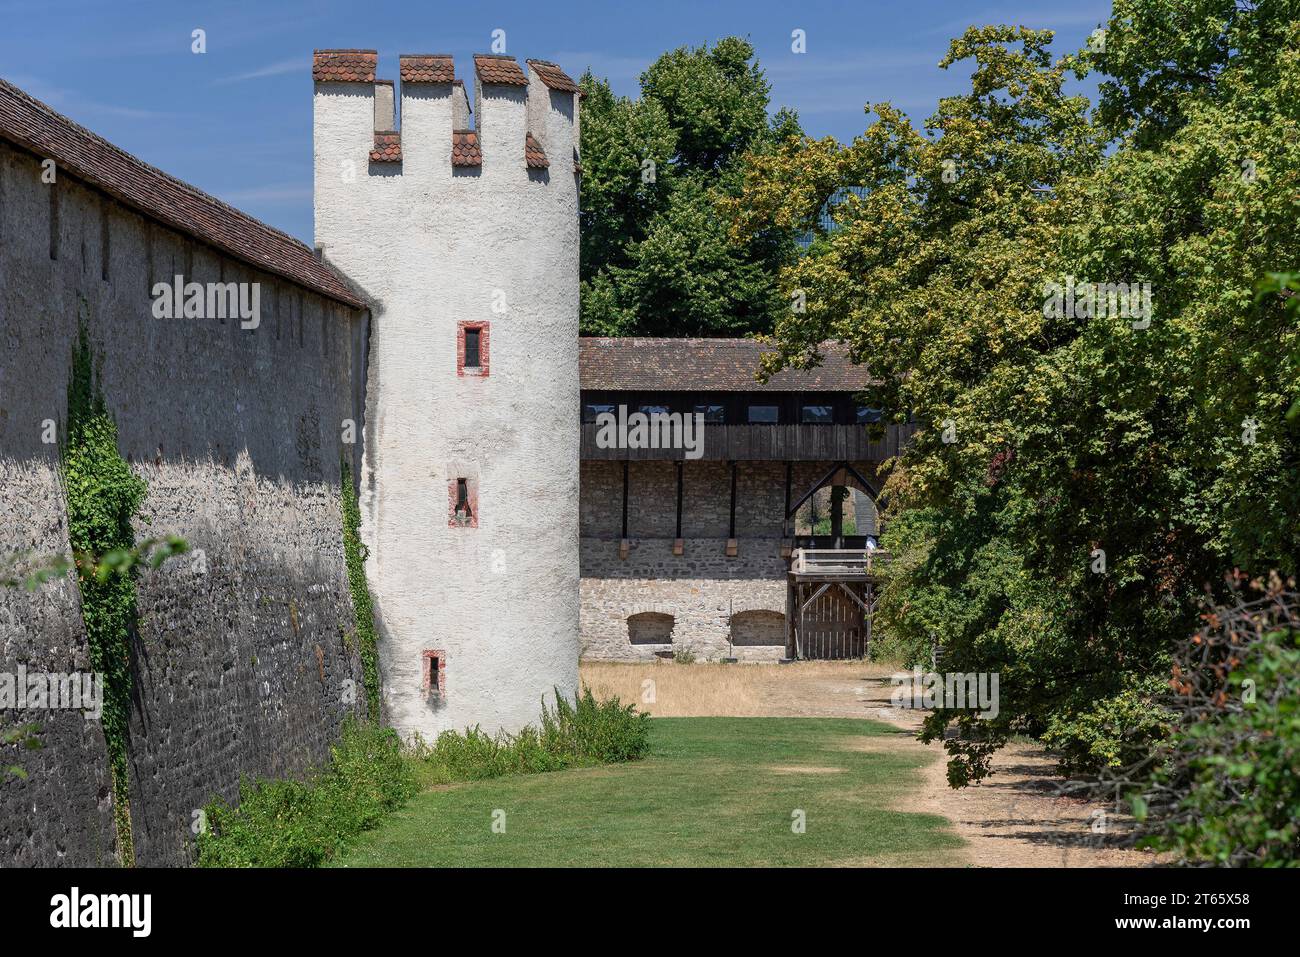 Basel, Switzerland - Focus on the old city wall, complex surrounding the central part of the Swiss city of Basel build between 1080 and 1398. Stock Photo